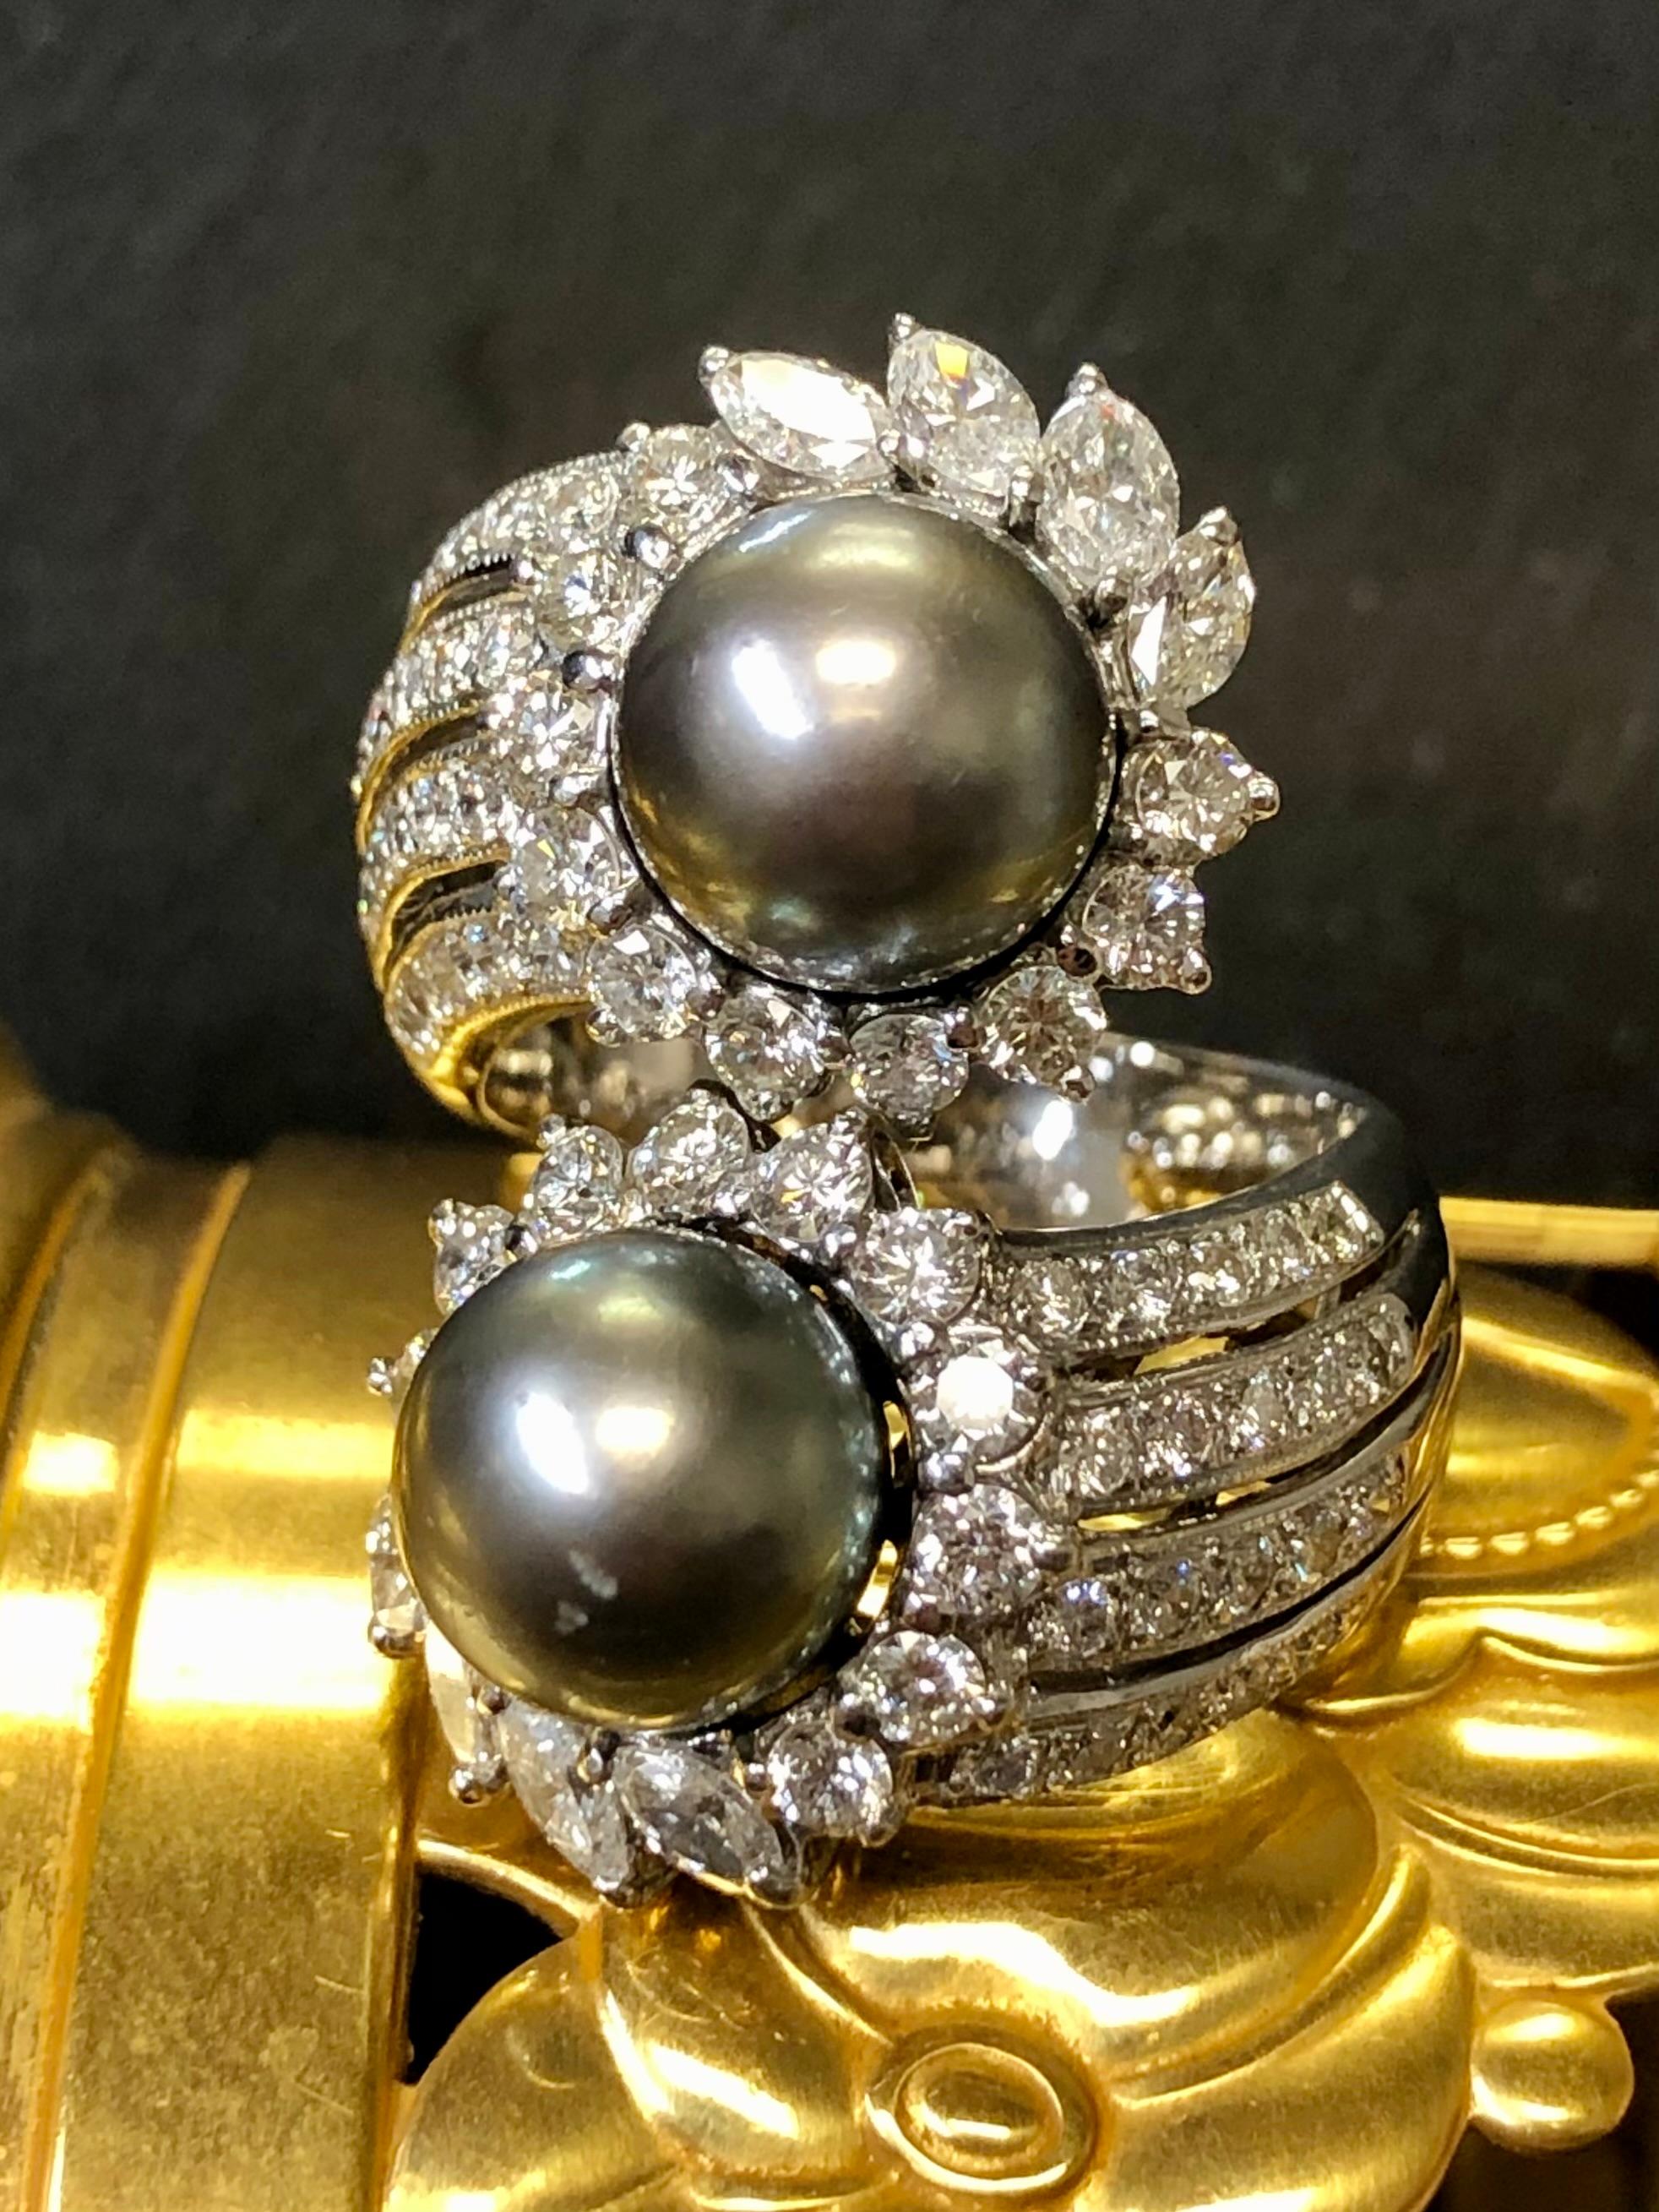 
A stunningly impressive large bypass ring done in 18K white gold and set with approximately 3cttw in G-I color Vs1-2 clarity marquise and round diamonds diamonds with each section centered by 10mm Tahitian pearls. Such a look and such a presence on